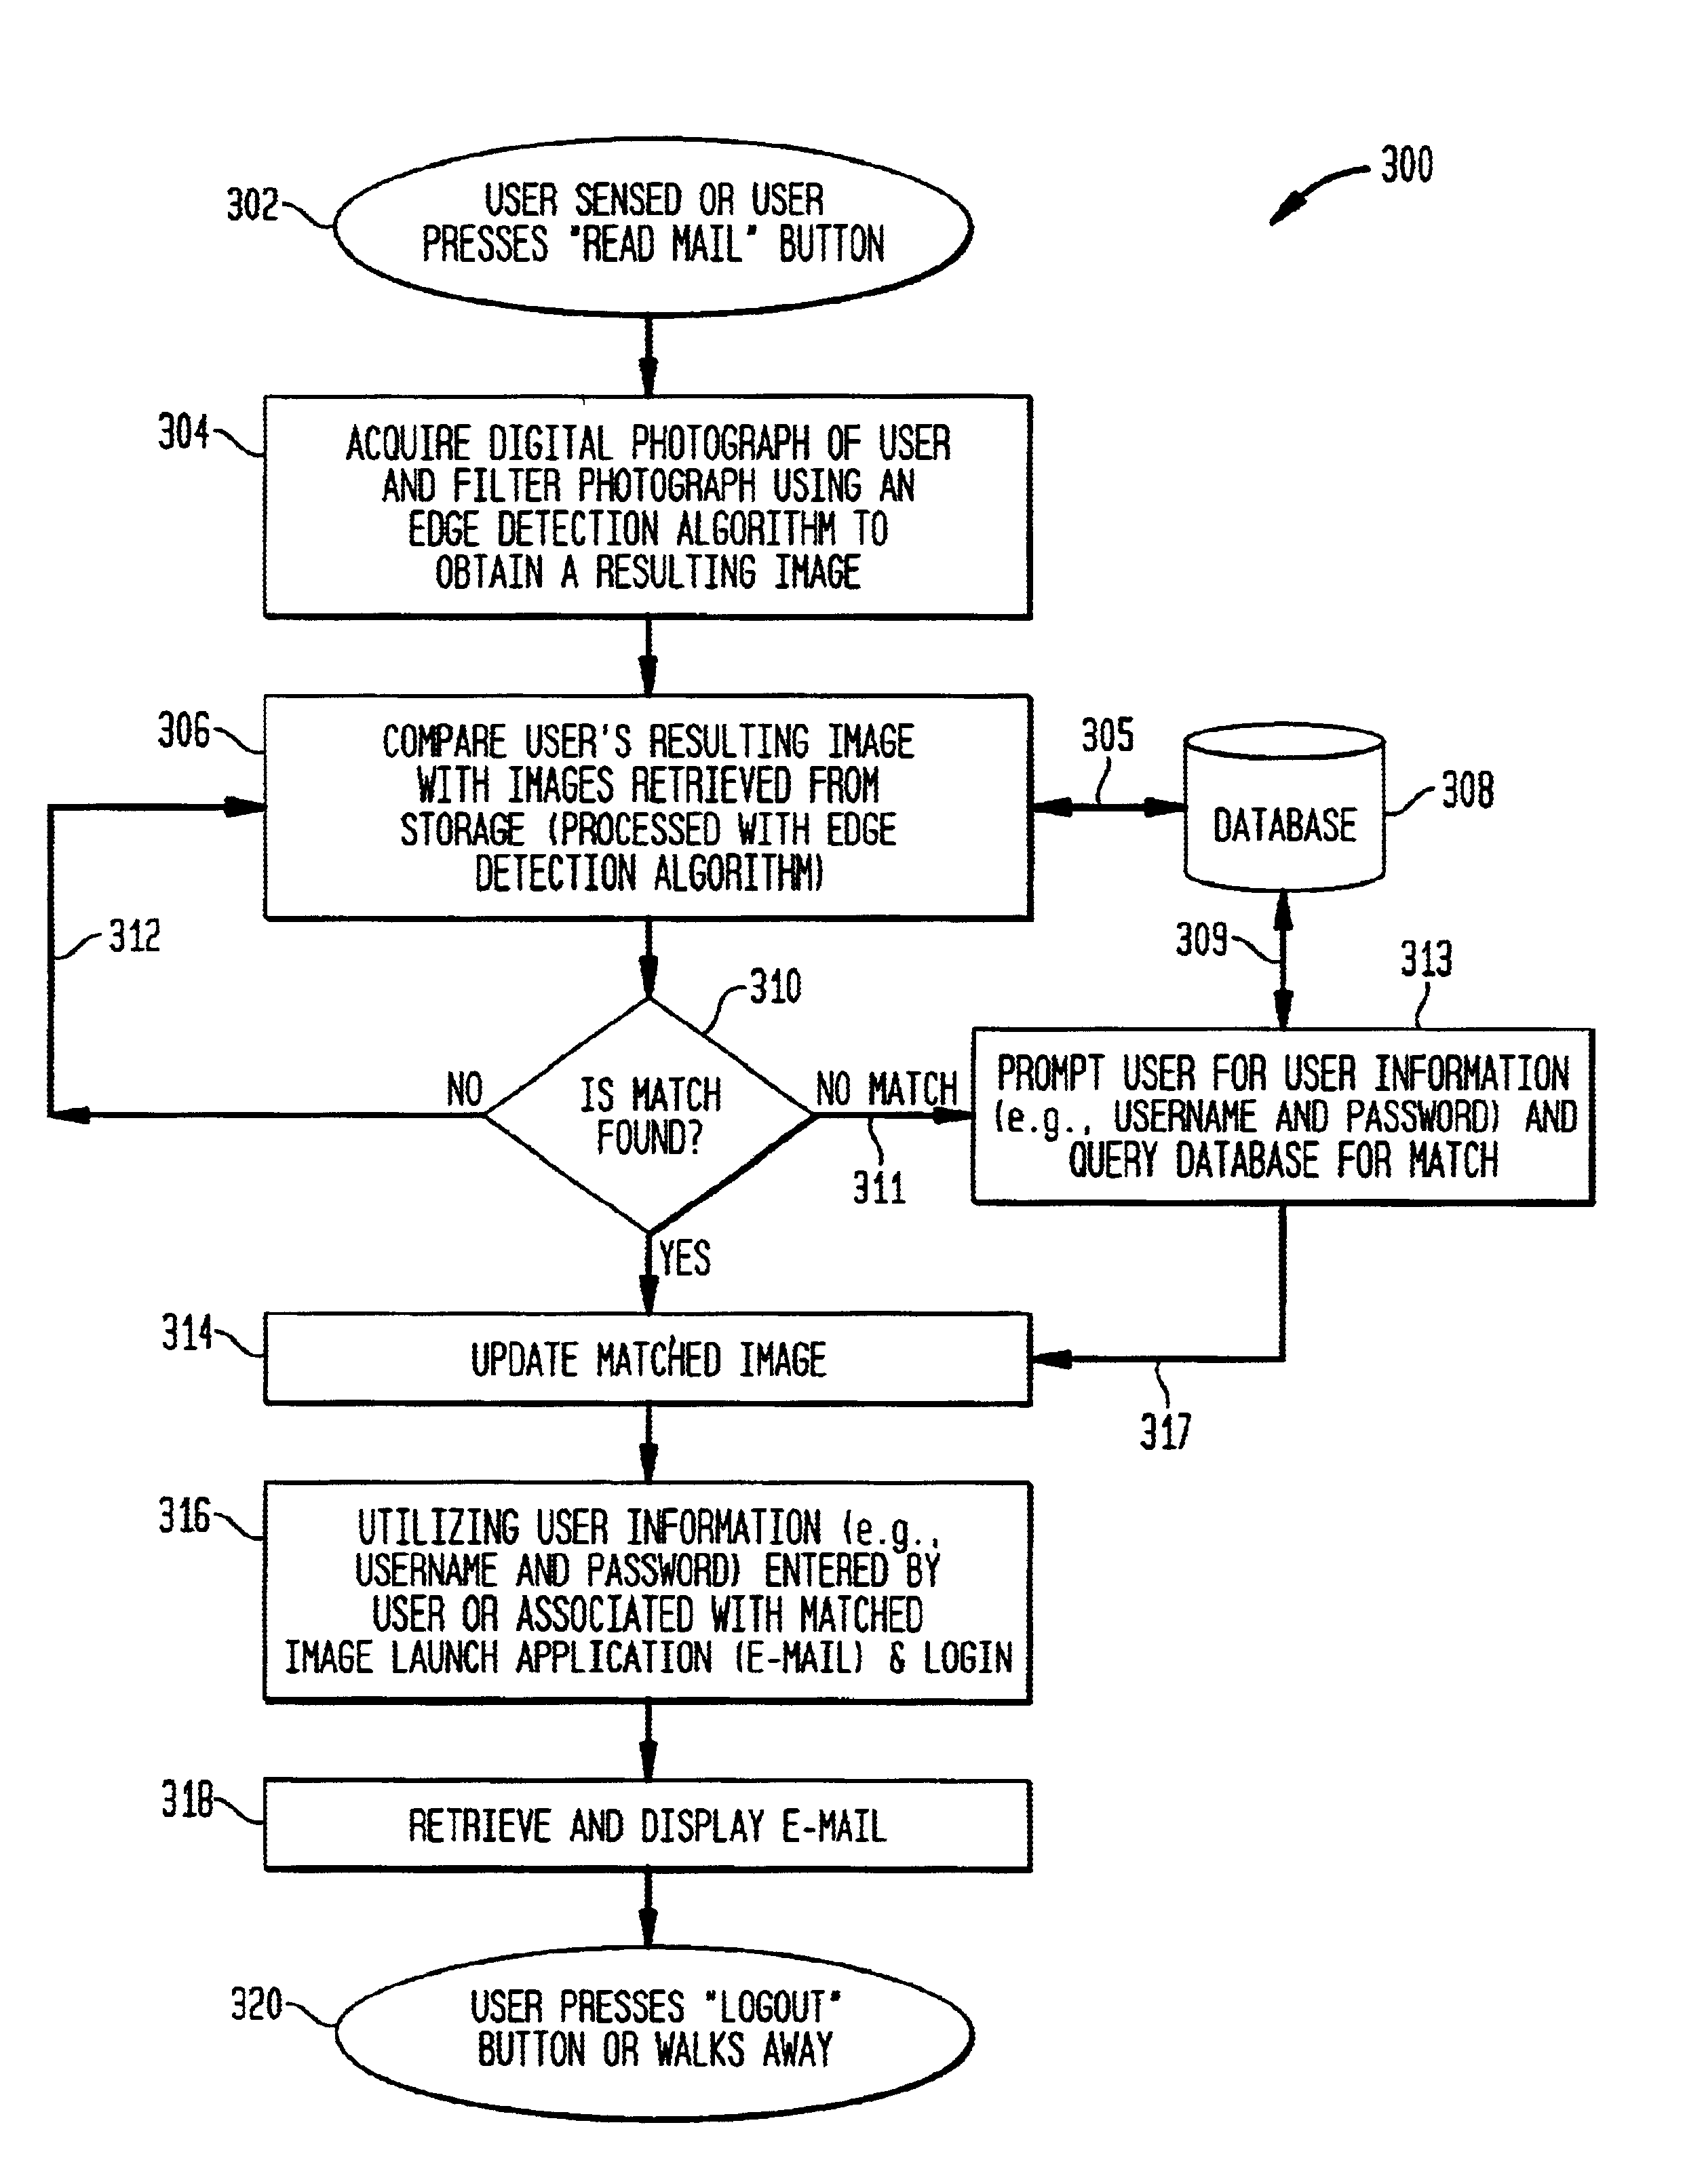 Method and system for providing application launch by identifying a user via a digital camera, utilizing an edge detection algorithm